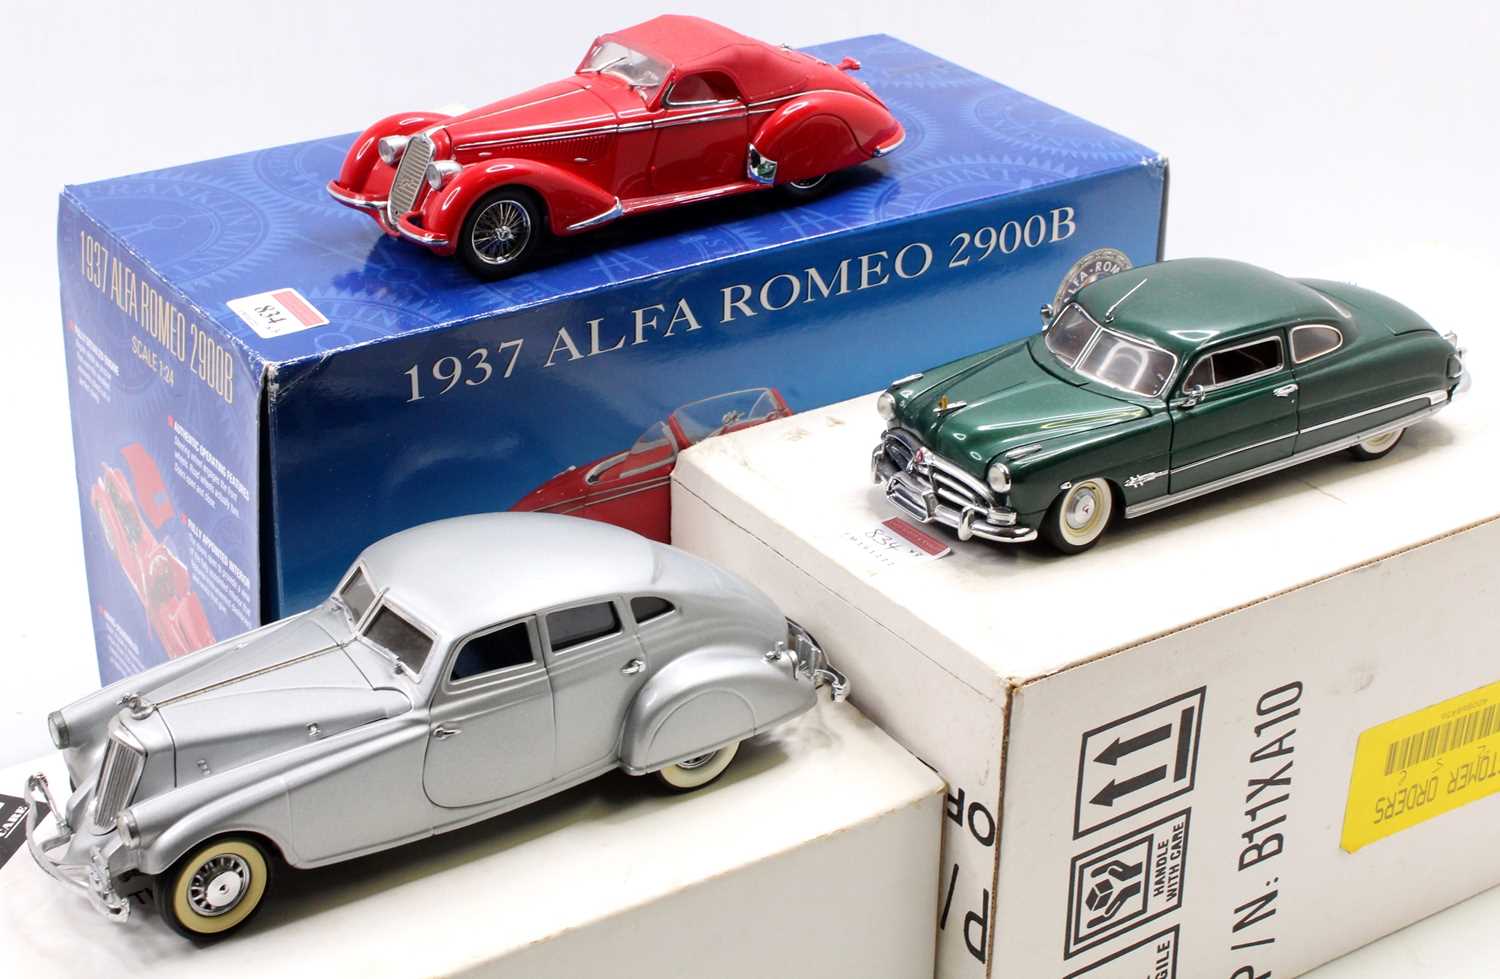 A Franklin Mint 1/24 scale boxed diecast group to include a 1937 Alfa Romeo 2900B saloon finished in